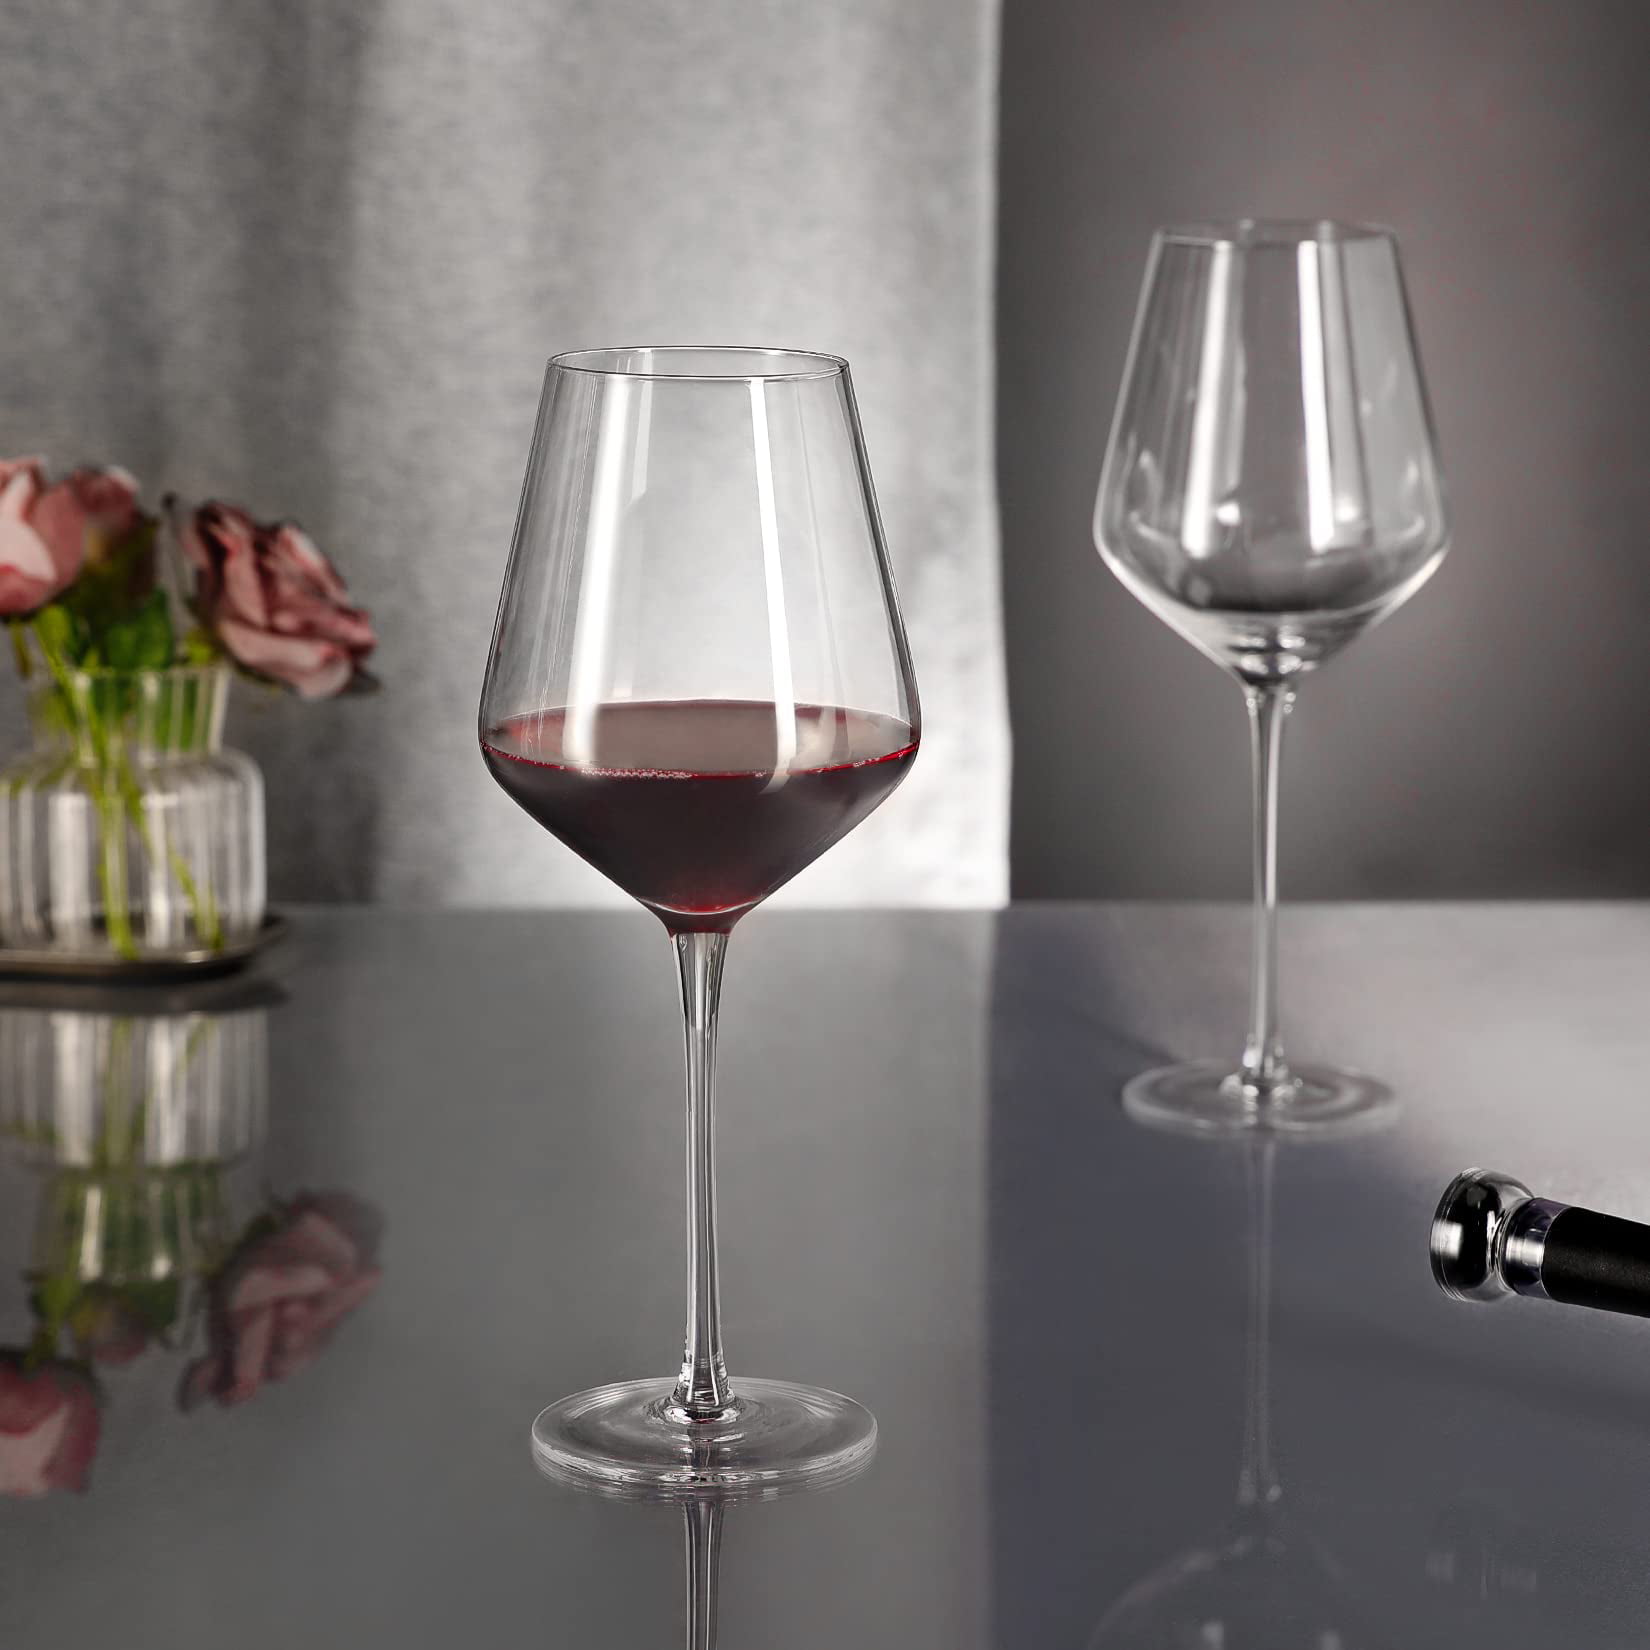 ACHEER Crystal Bordeaux Red Wine Glasses Set of 2, 20 Oz, Hand